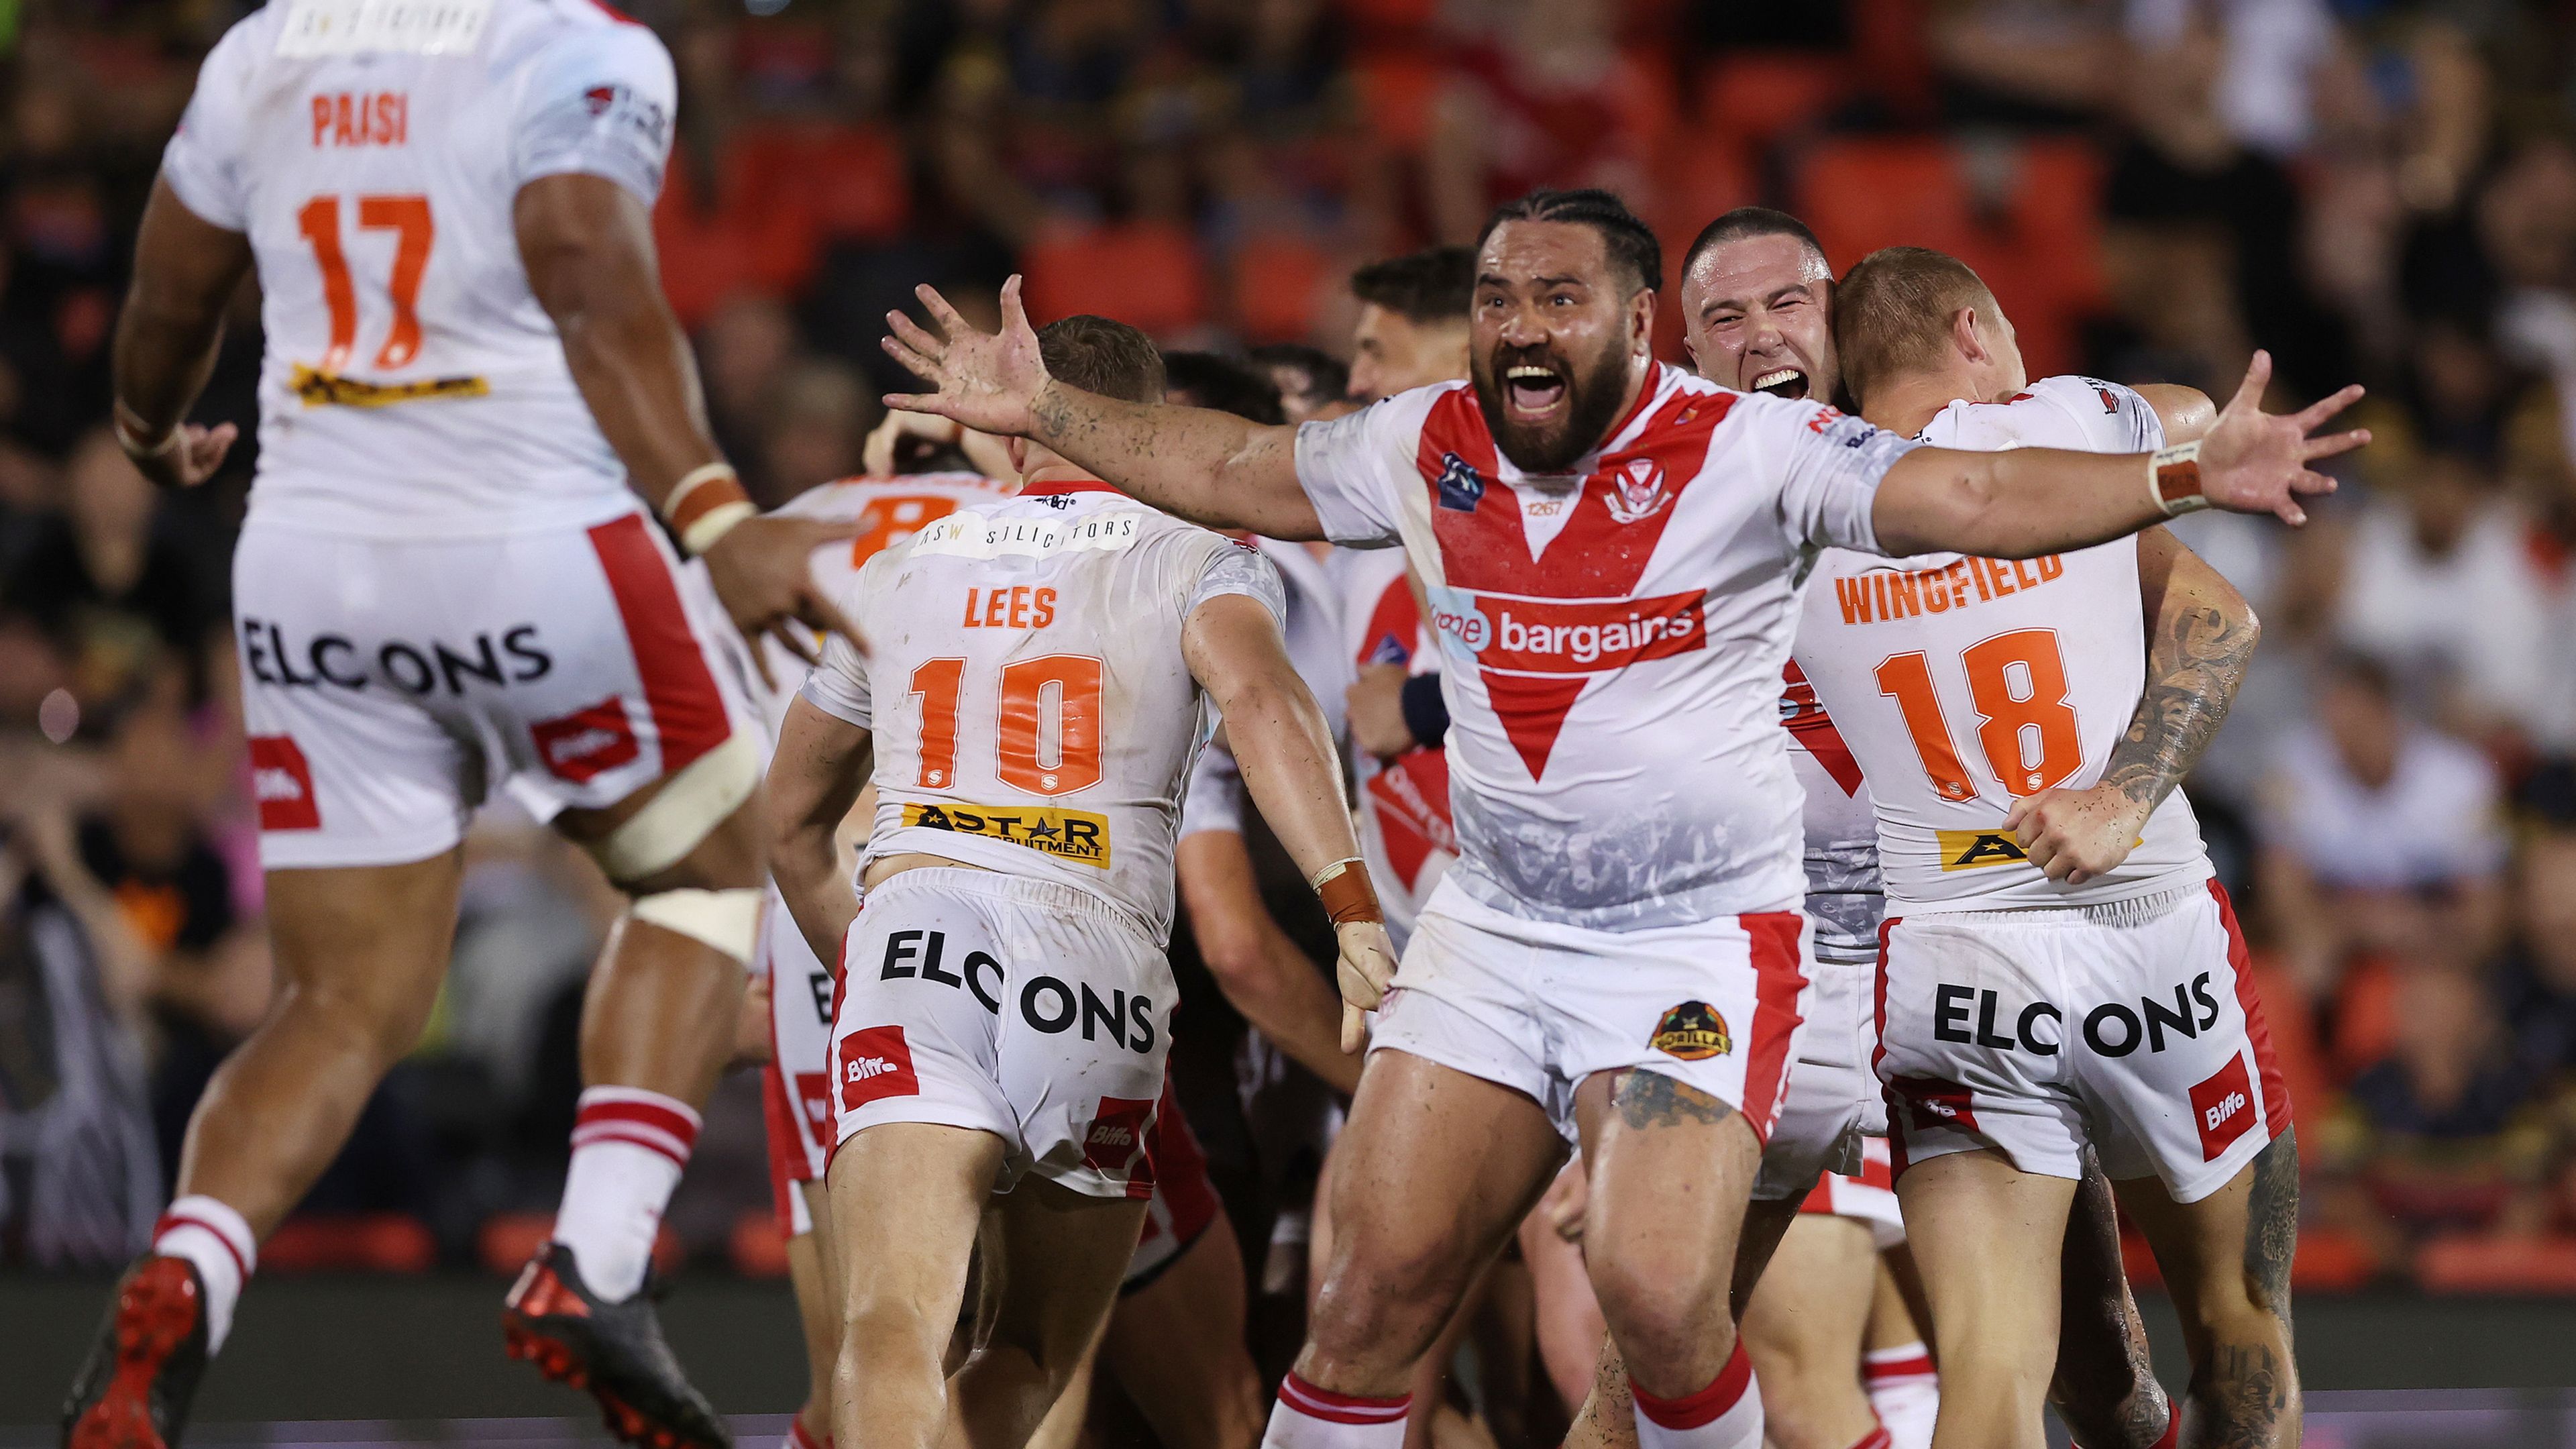 St Helens claim 'unbelievable' third World Club Challenge win over Penrith